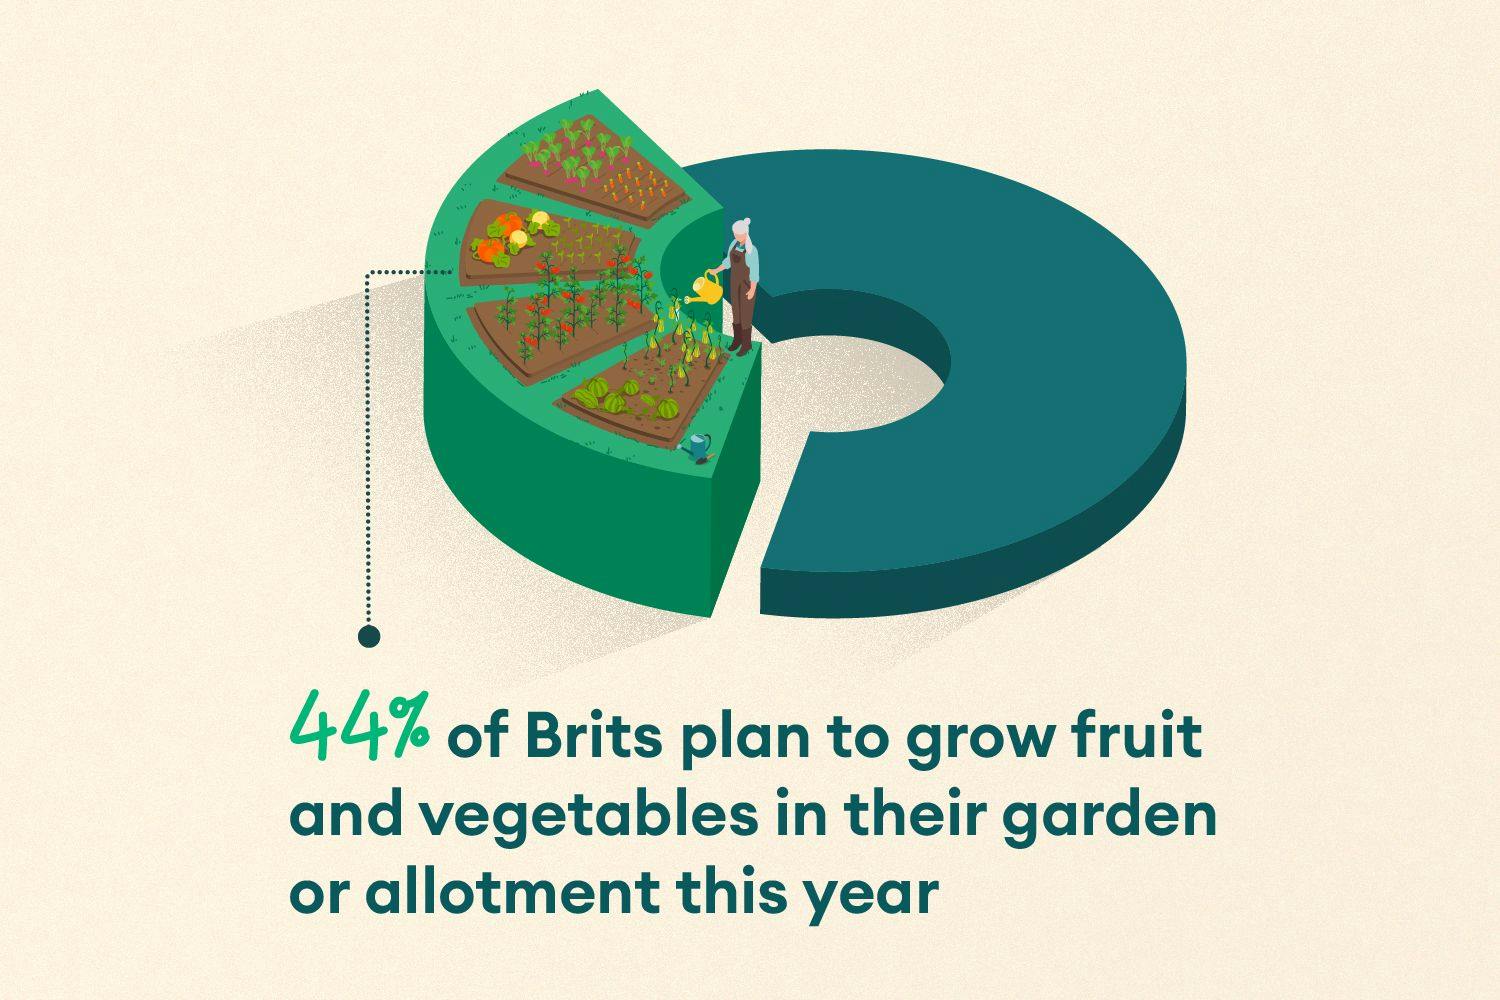 44% of Brits plan to grow fruit and veg in their garden or allotment this year